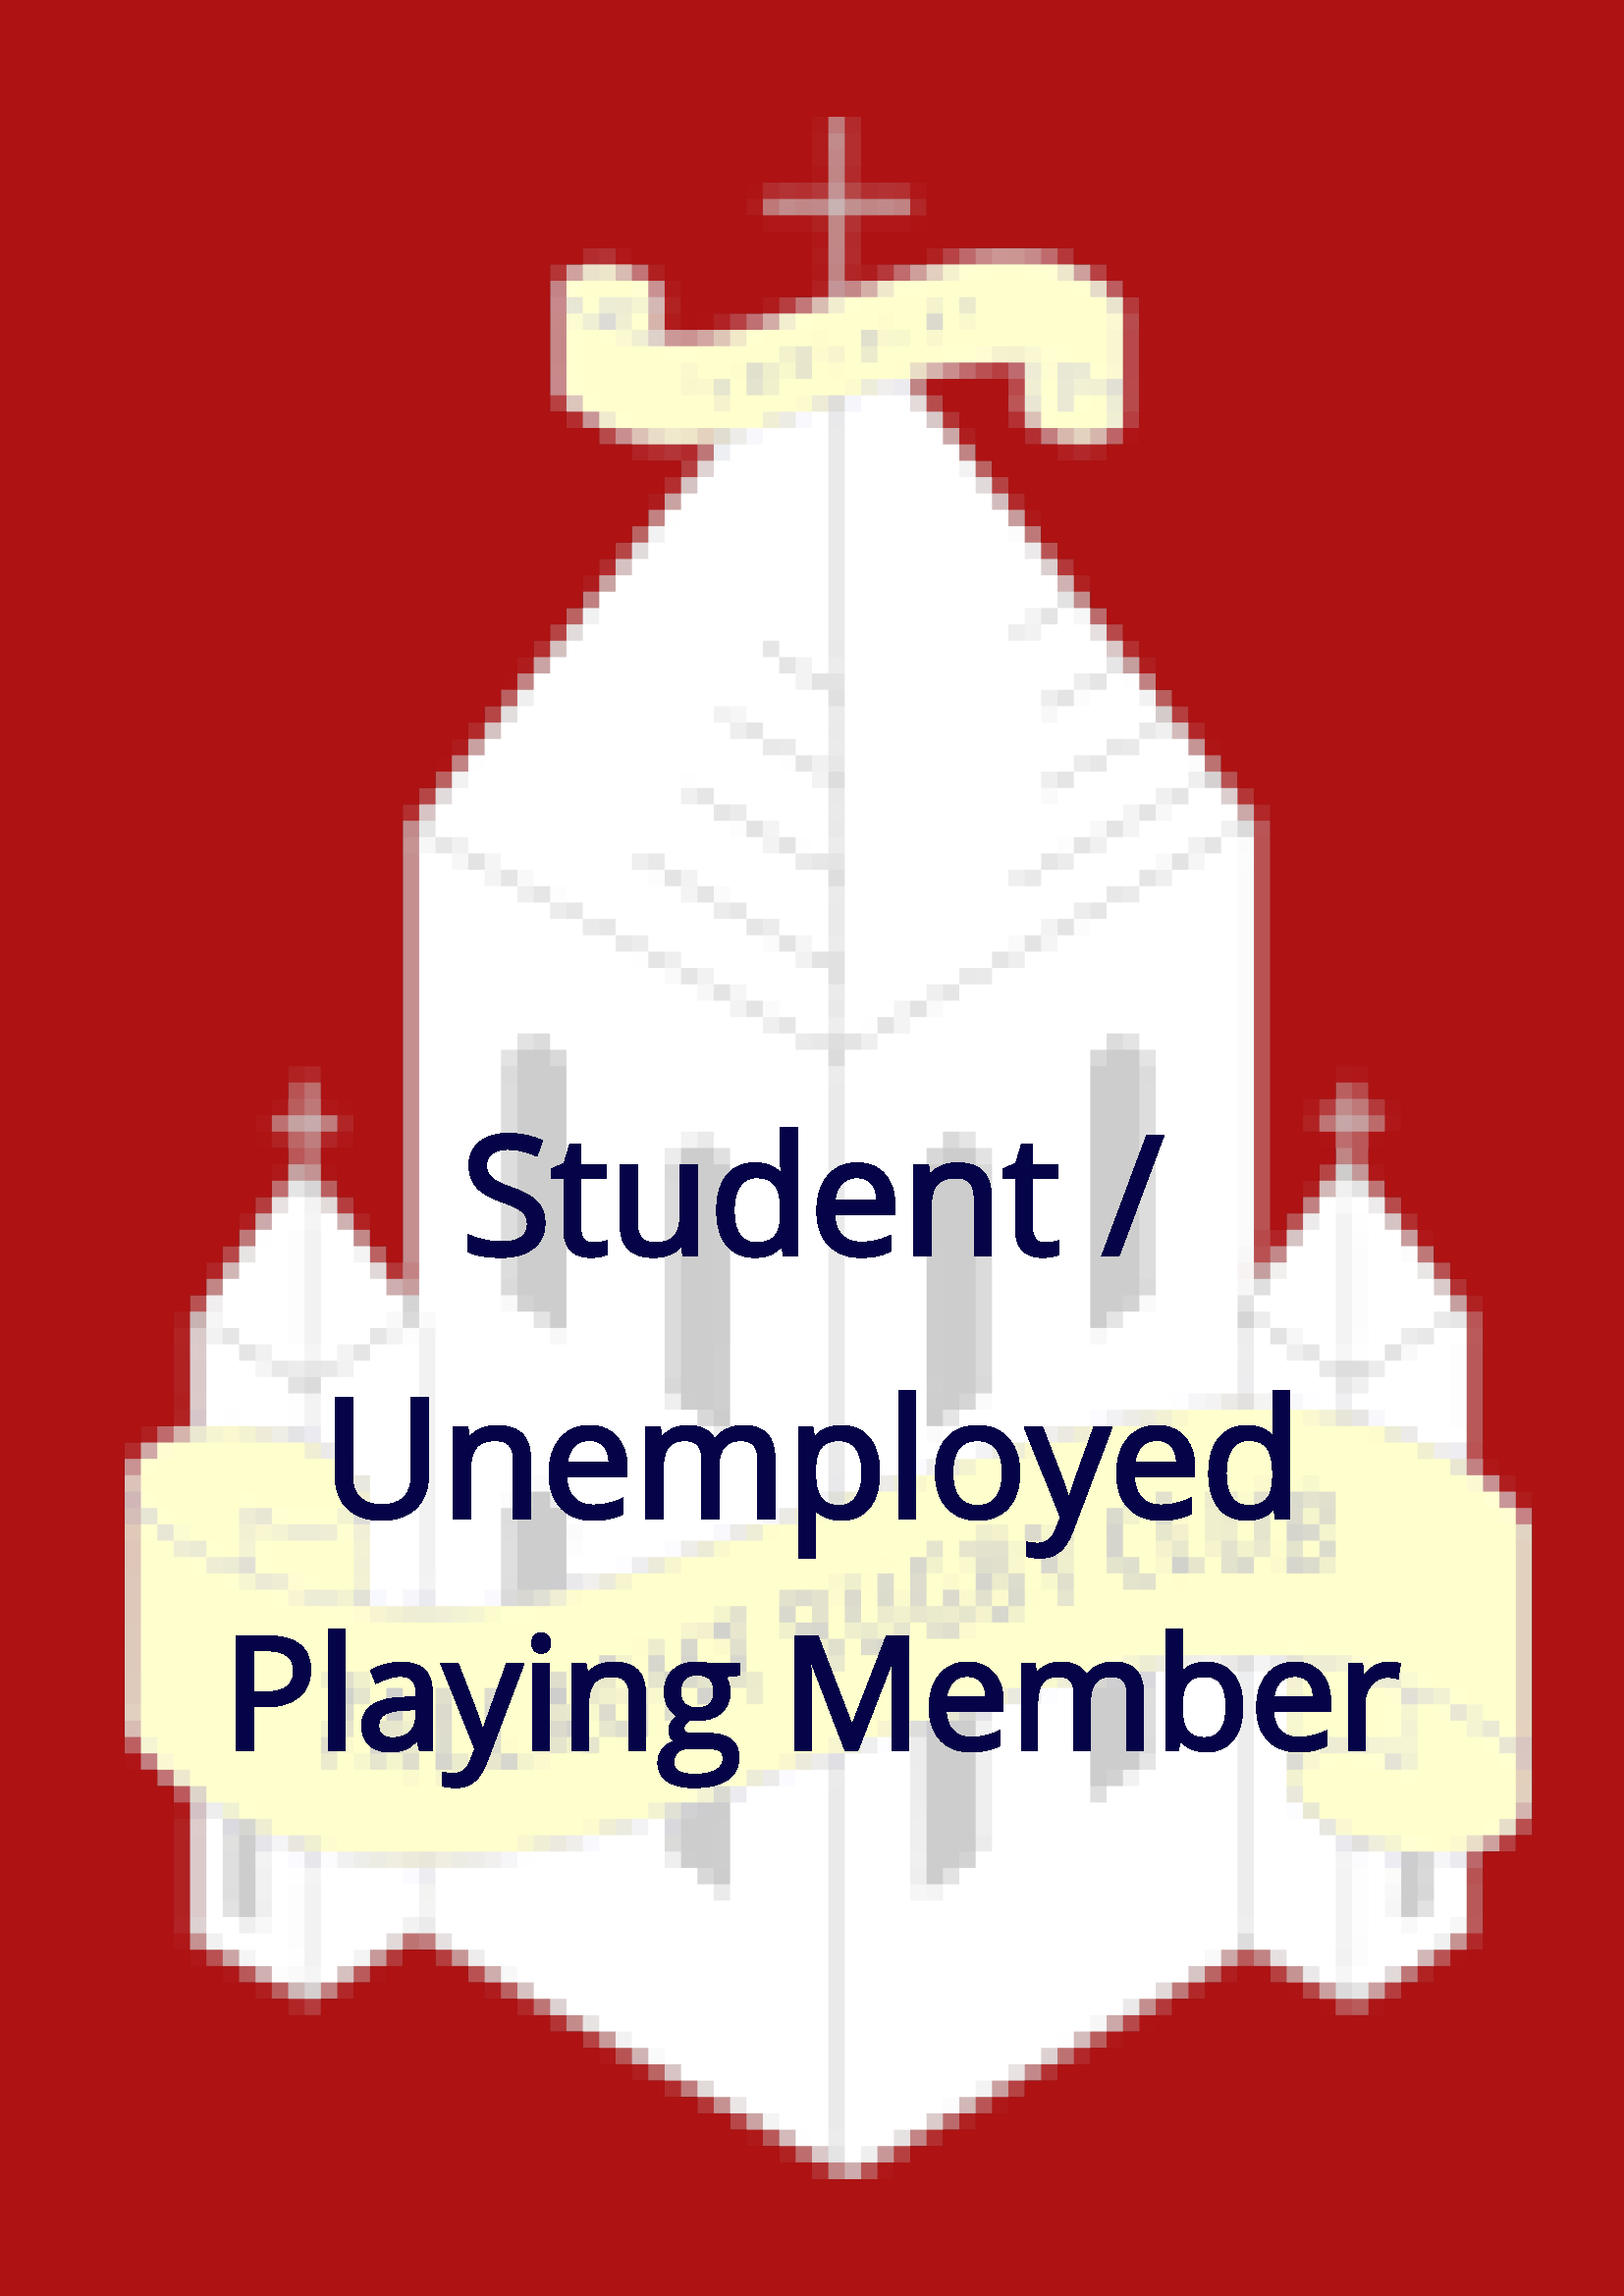 Student/Unemployed Member 2022/23